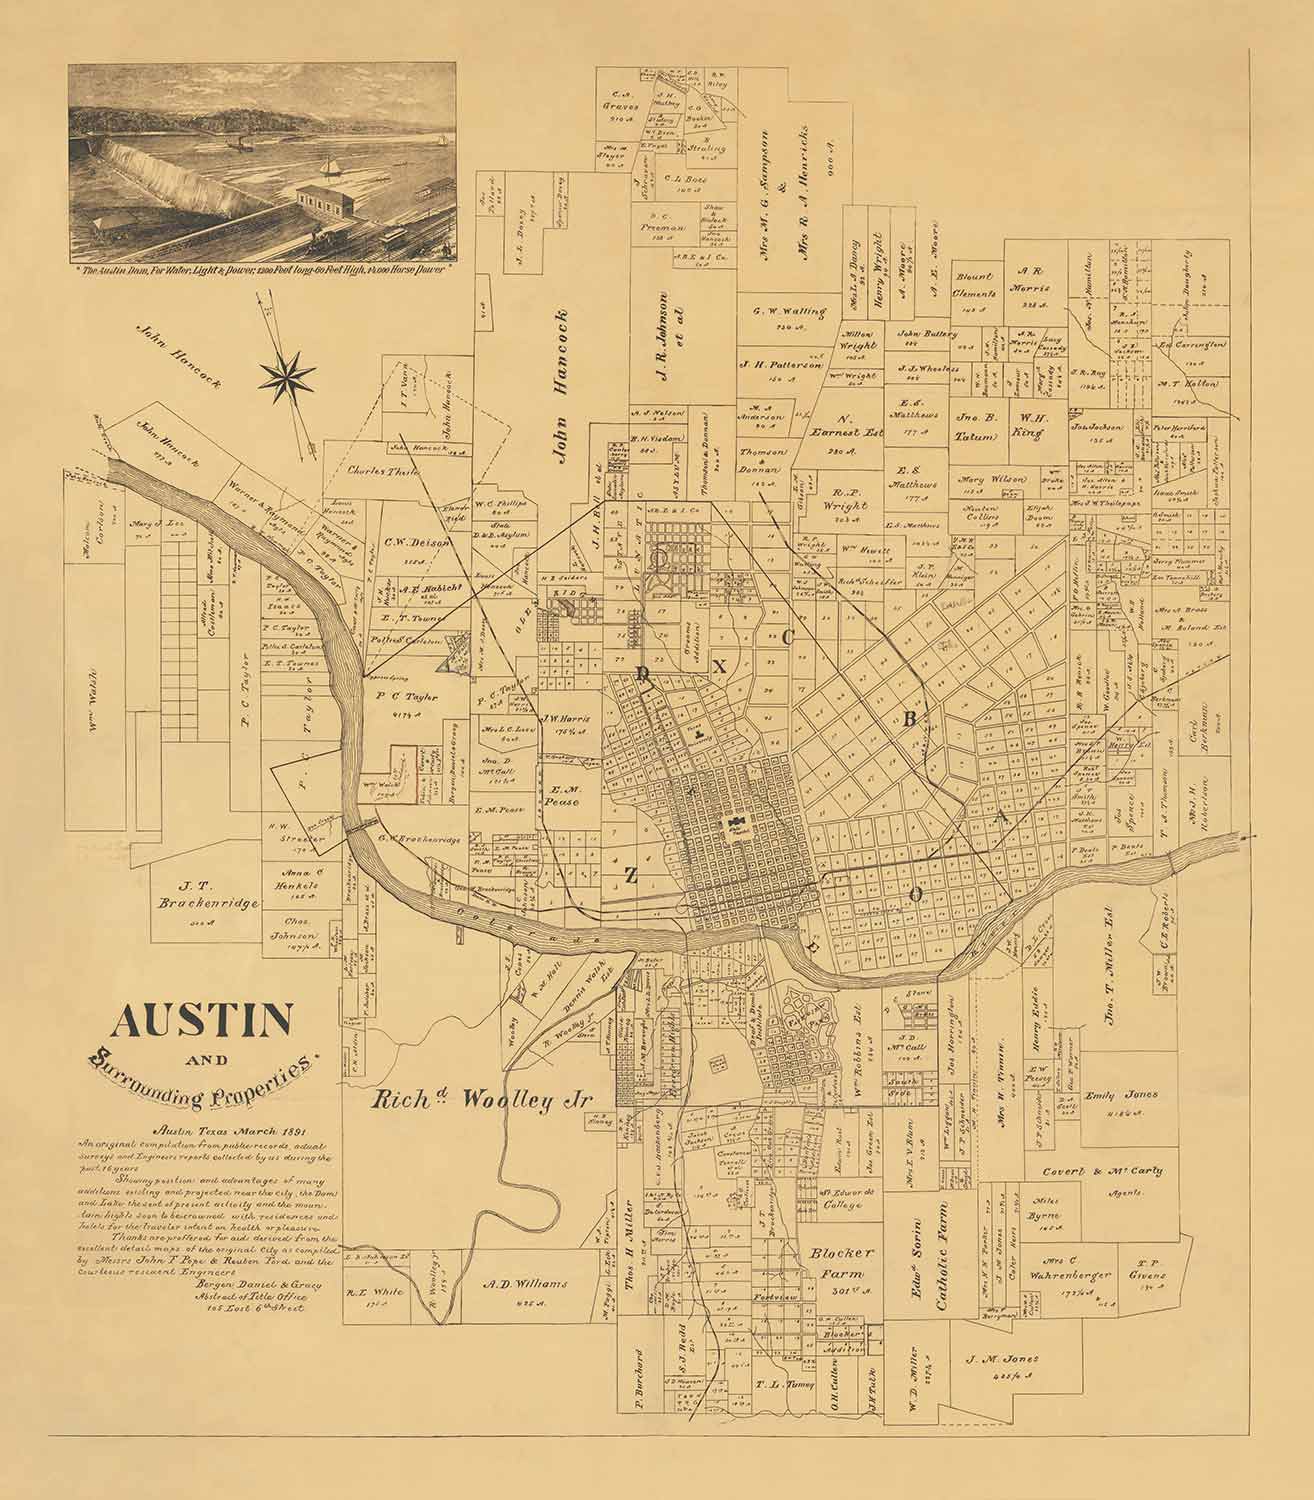 Rare Old Map of Austin, Texas in 1891 - Very Early City Plan, State Capitol, Railroad, UT Austin, Austin Dam